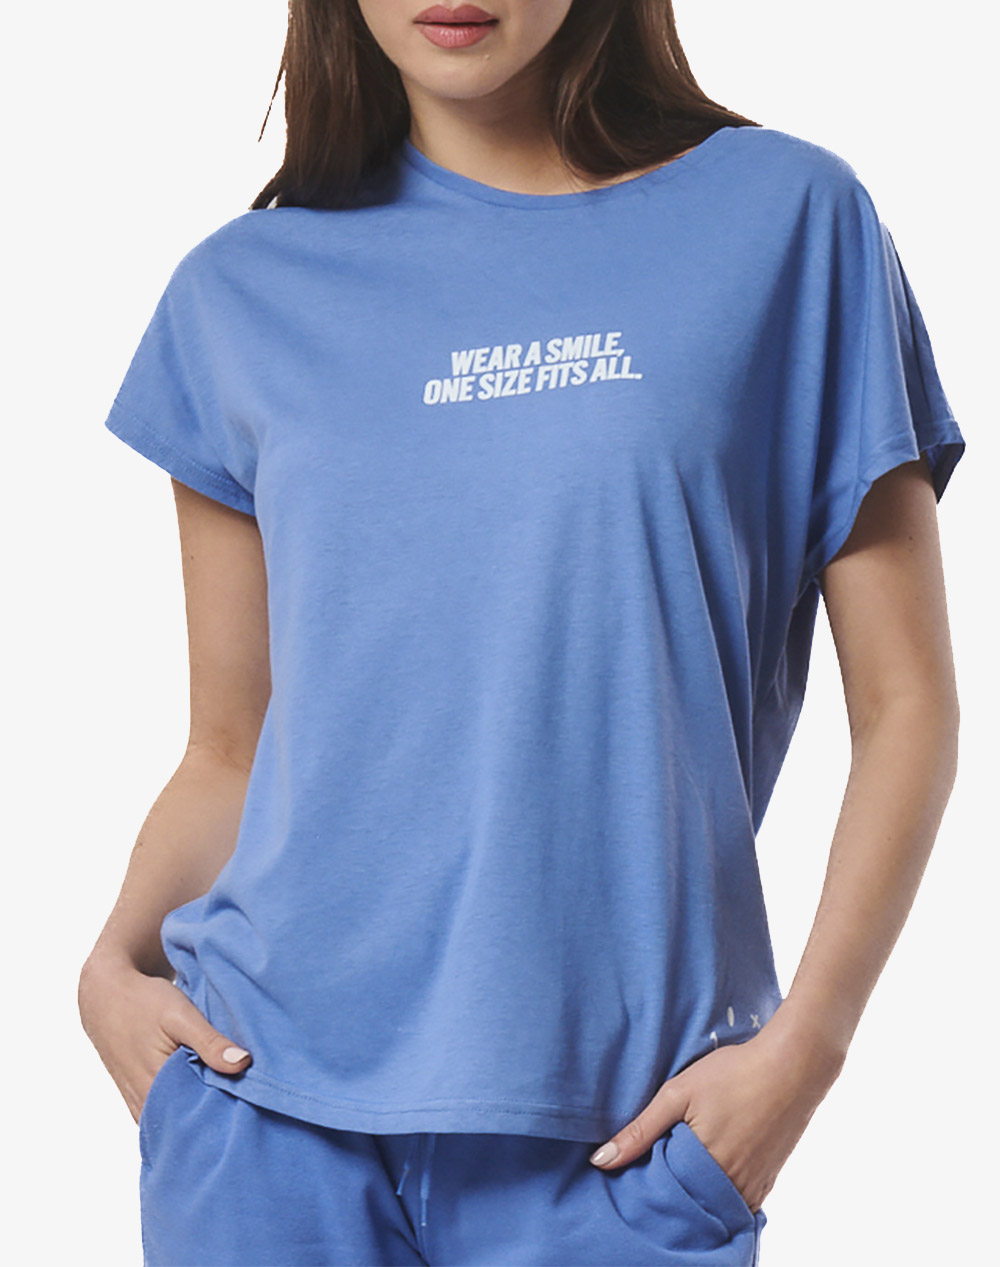 BODY ACTION WOMEN”S RELAXED FIT T-SHIRT 051421-01-RIVIERA BLUE Blue 3810PBODY3400031_XR30952